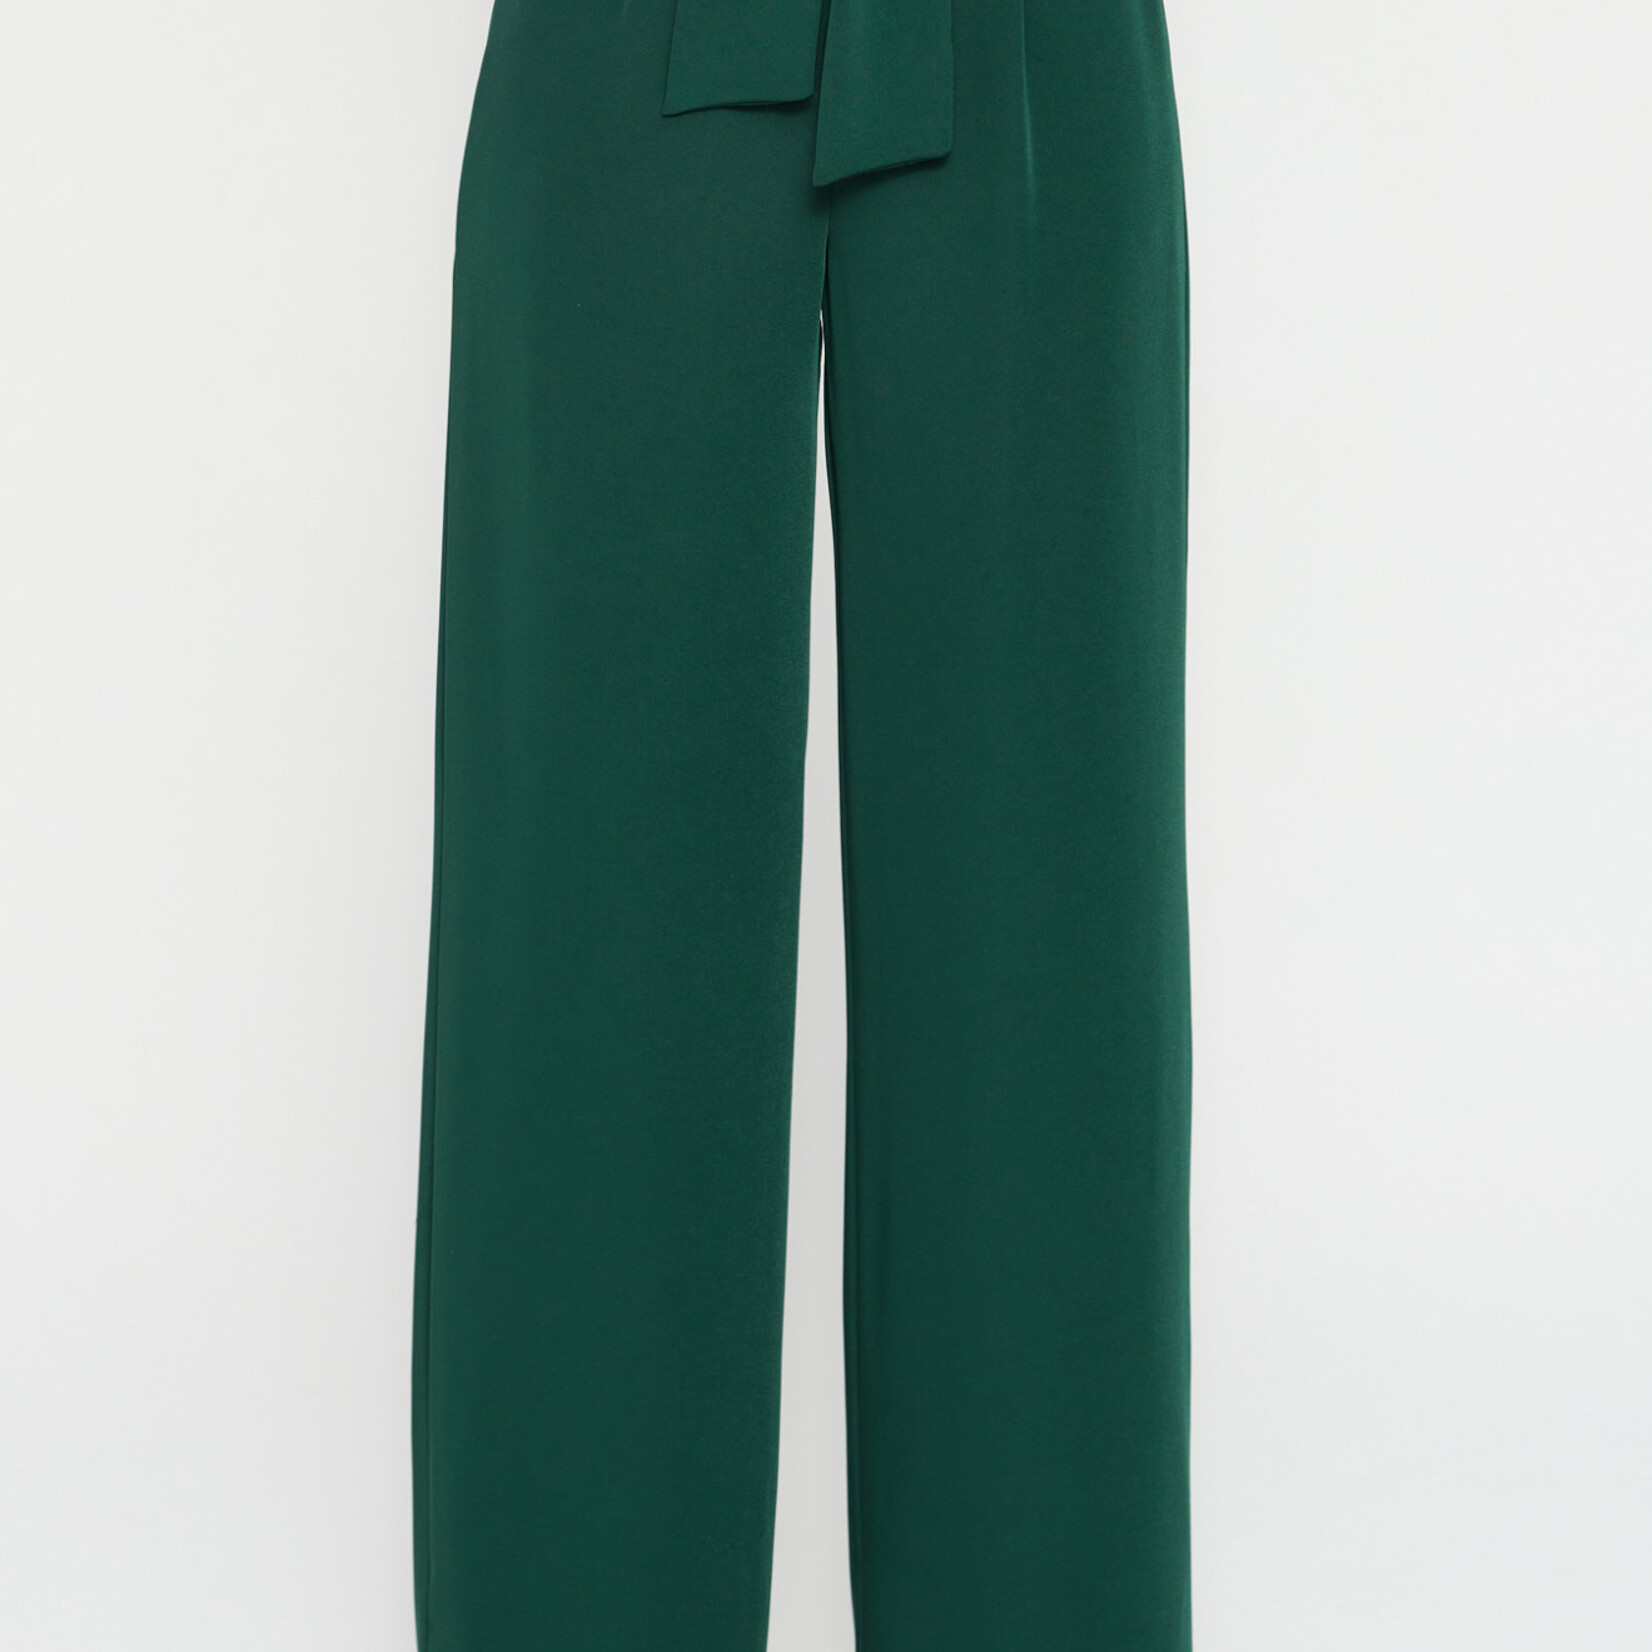 Style State Emerald Bag Waisted Wide Leg Pants